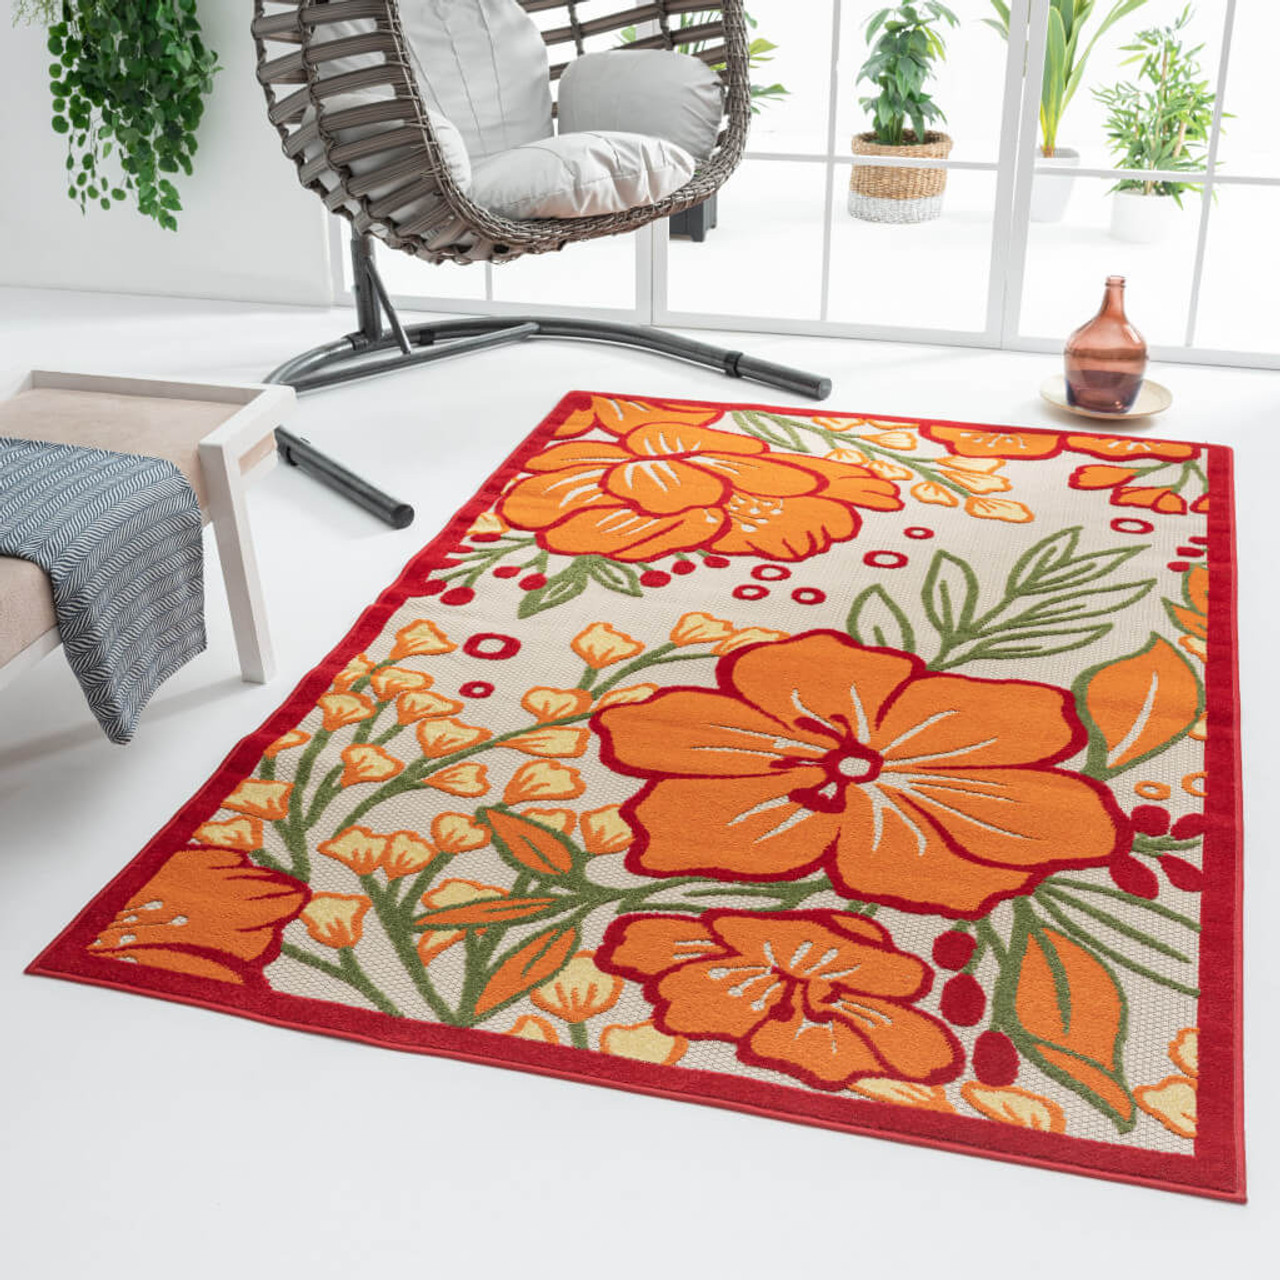 8' X 10' Orange And Ivory Floral Stain Resistant Indoor Outdoor Area Rug